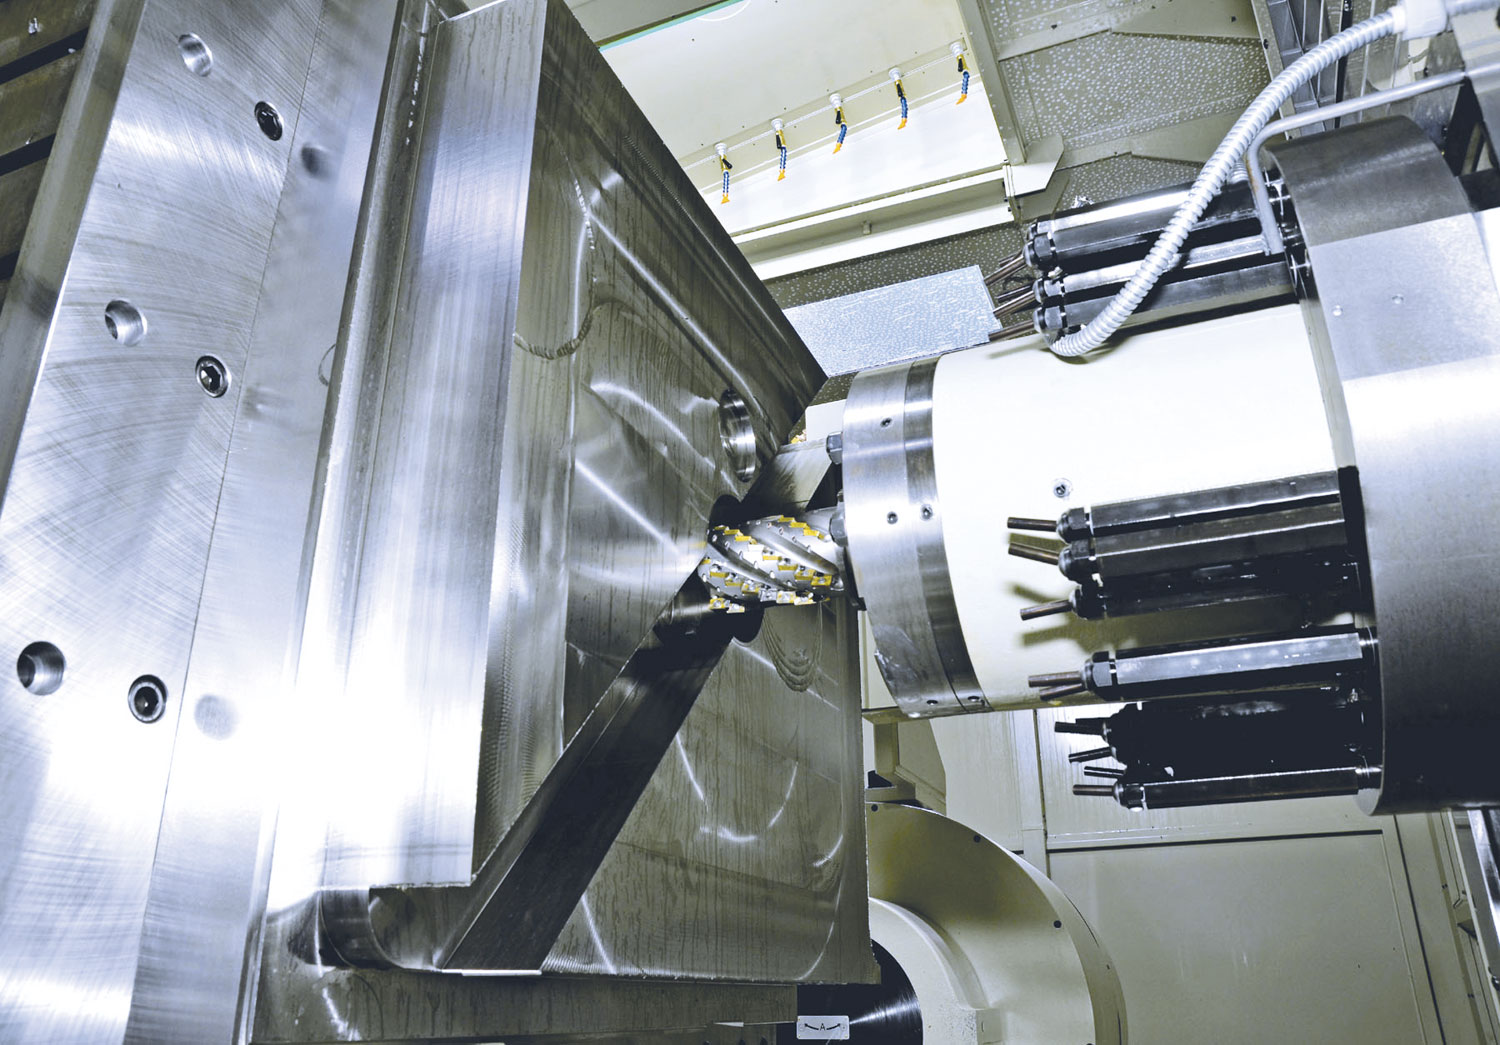 Mitsui Seiki's HU100 with the KM4X tool in action with Kennametal's KM4X spindle connection.